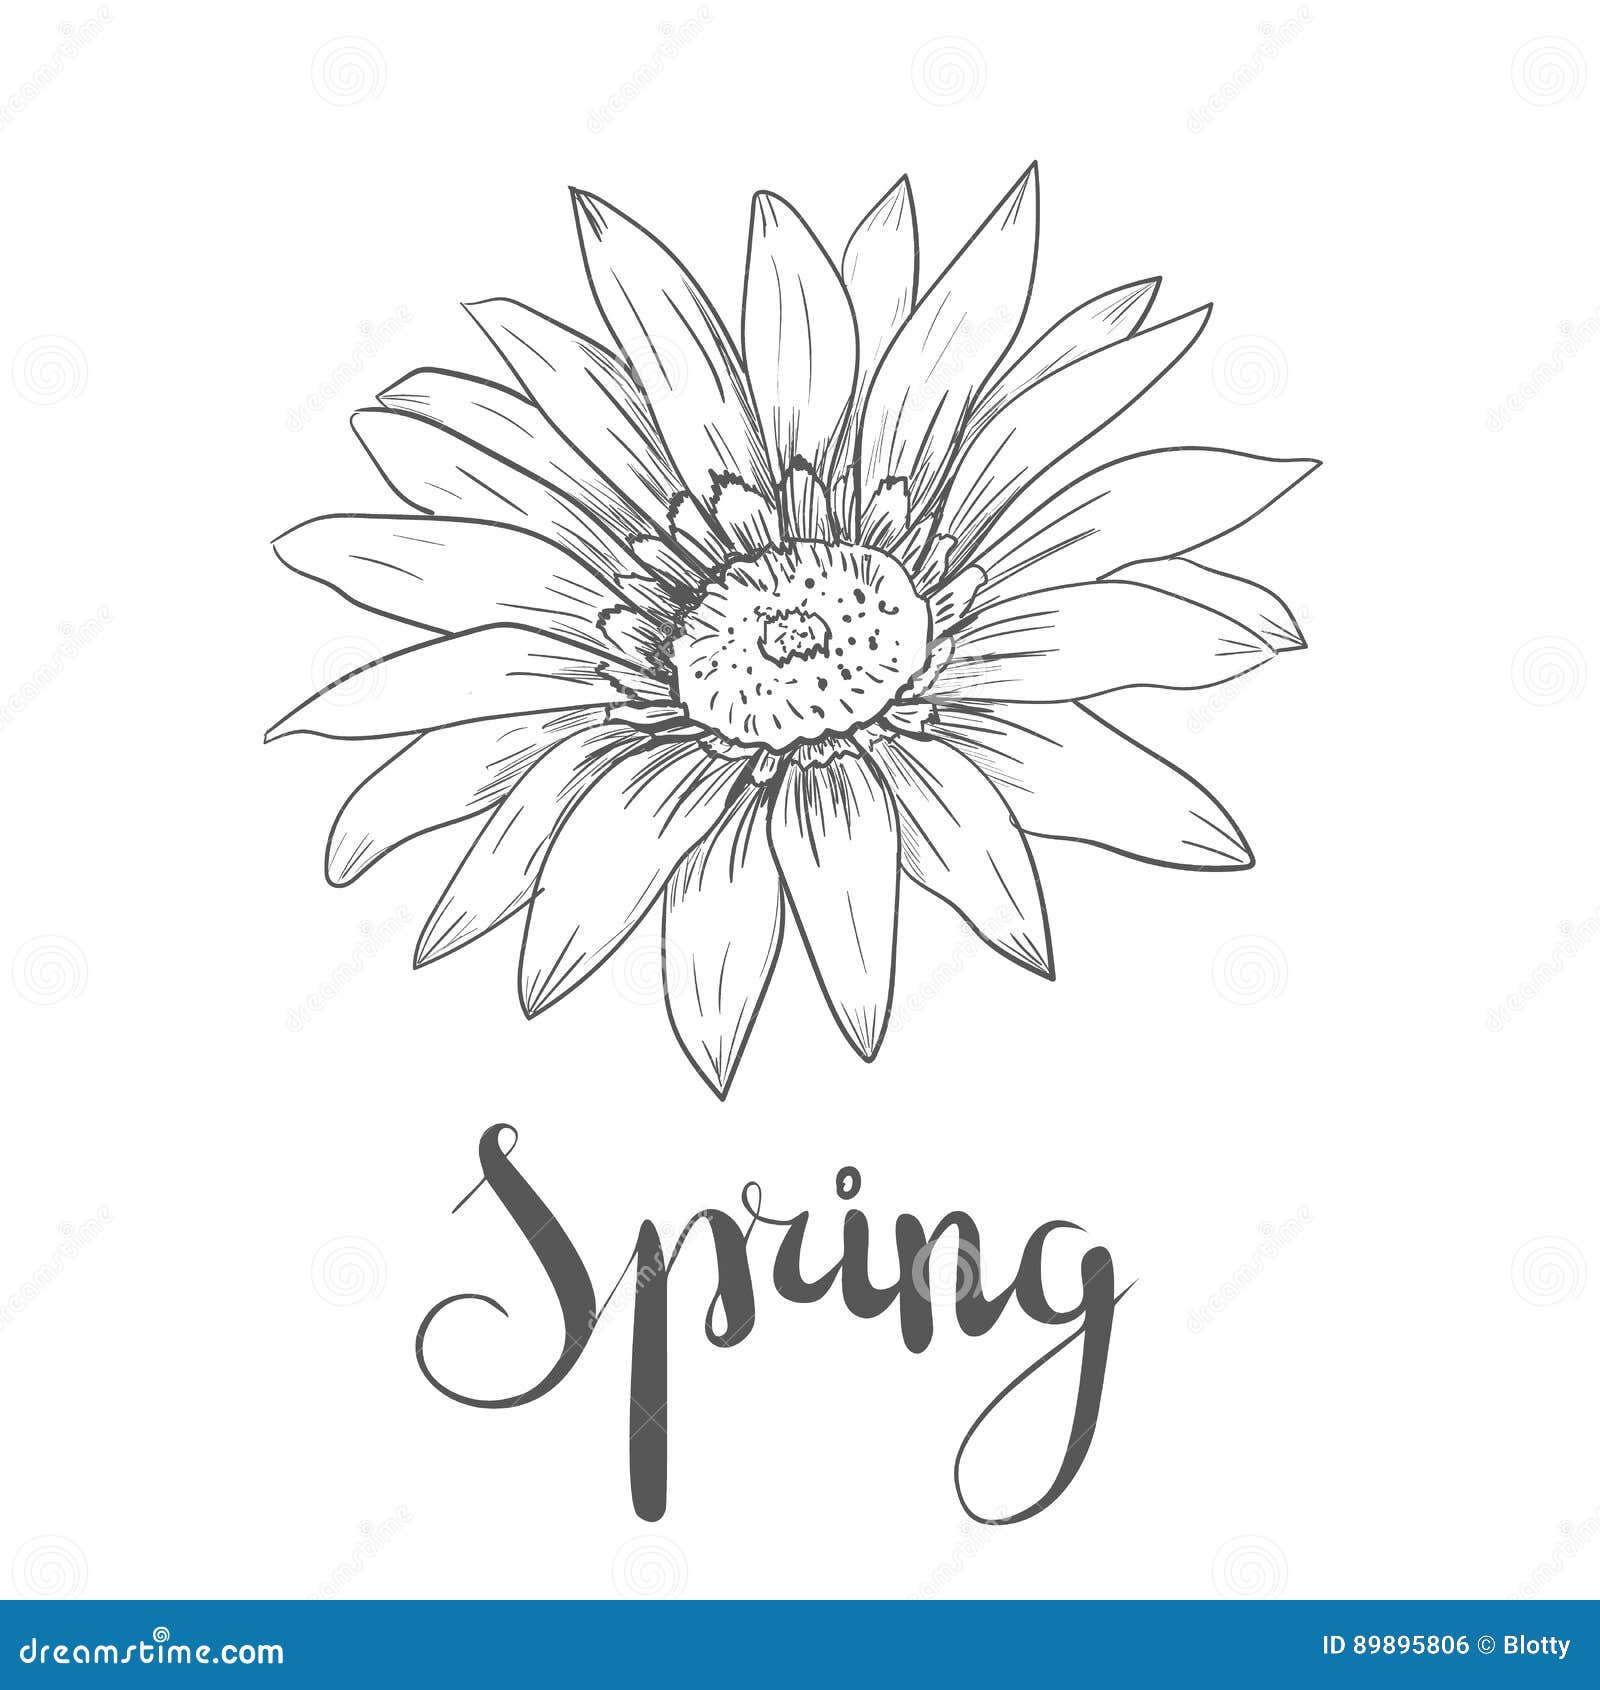 Hand Drawn Vector Pen And Ink Illustration Of Gerbera Daisy Flower Stock Vector Illustration Of Line Beautiful 89895806